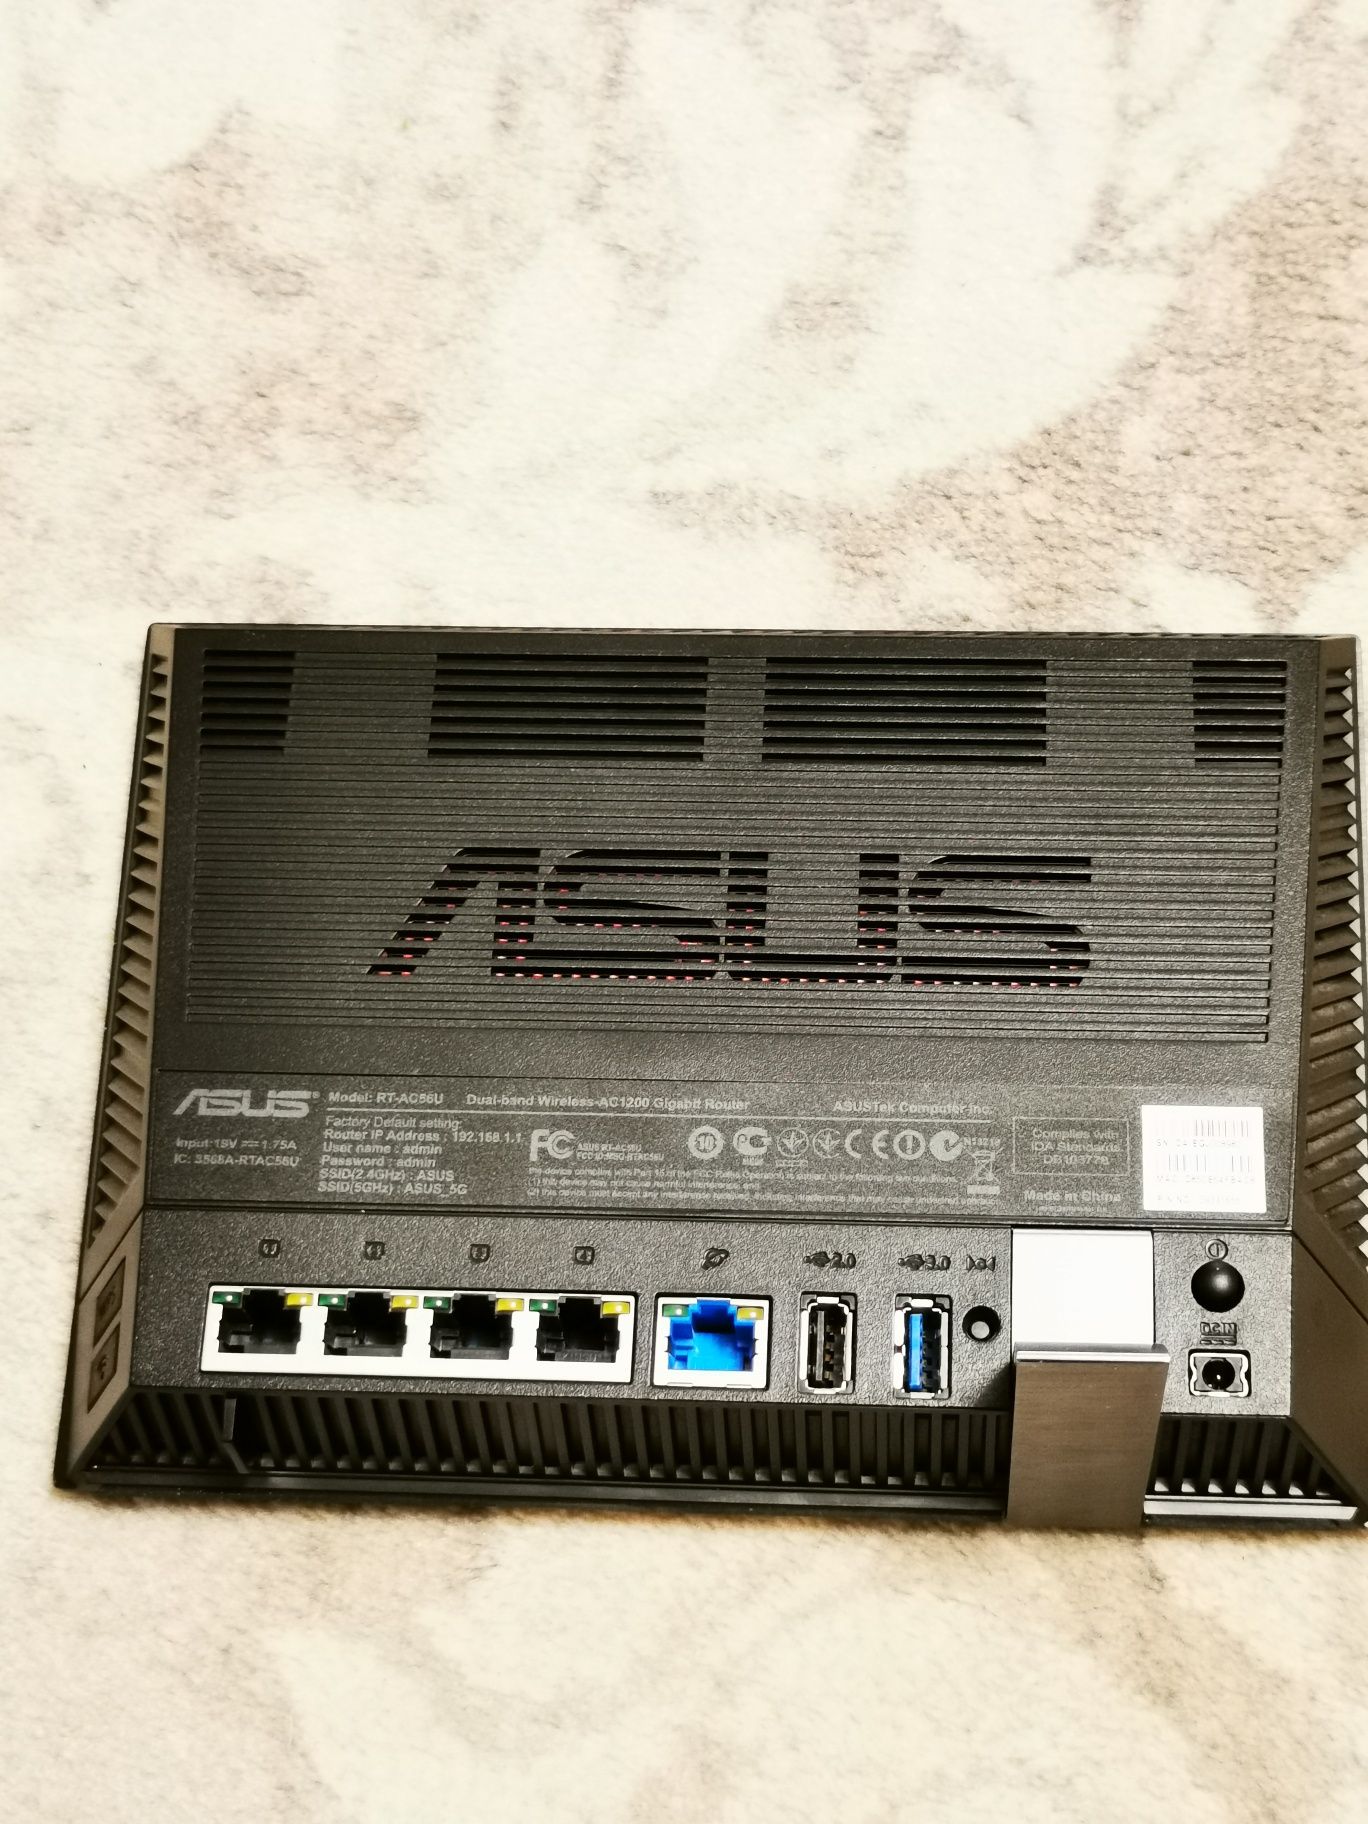 Vand router Asus RT-AC56U, gigabit dual band

Router w